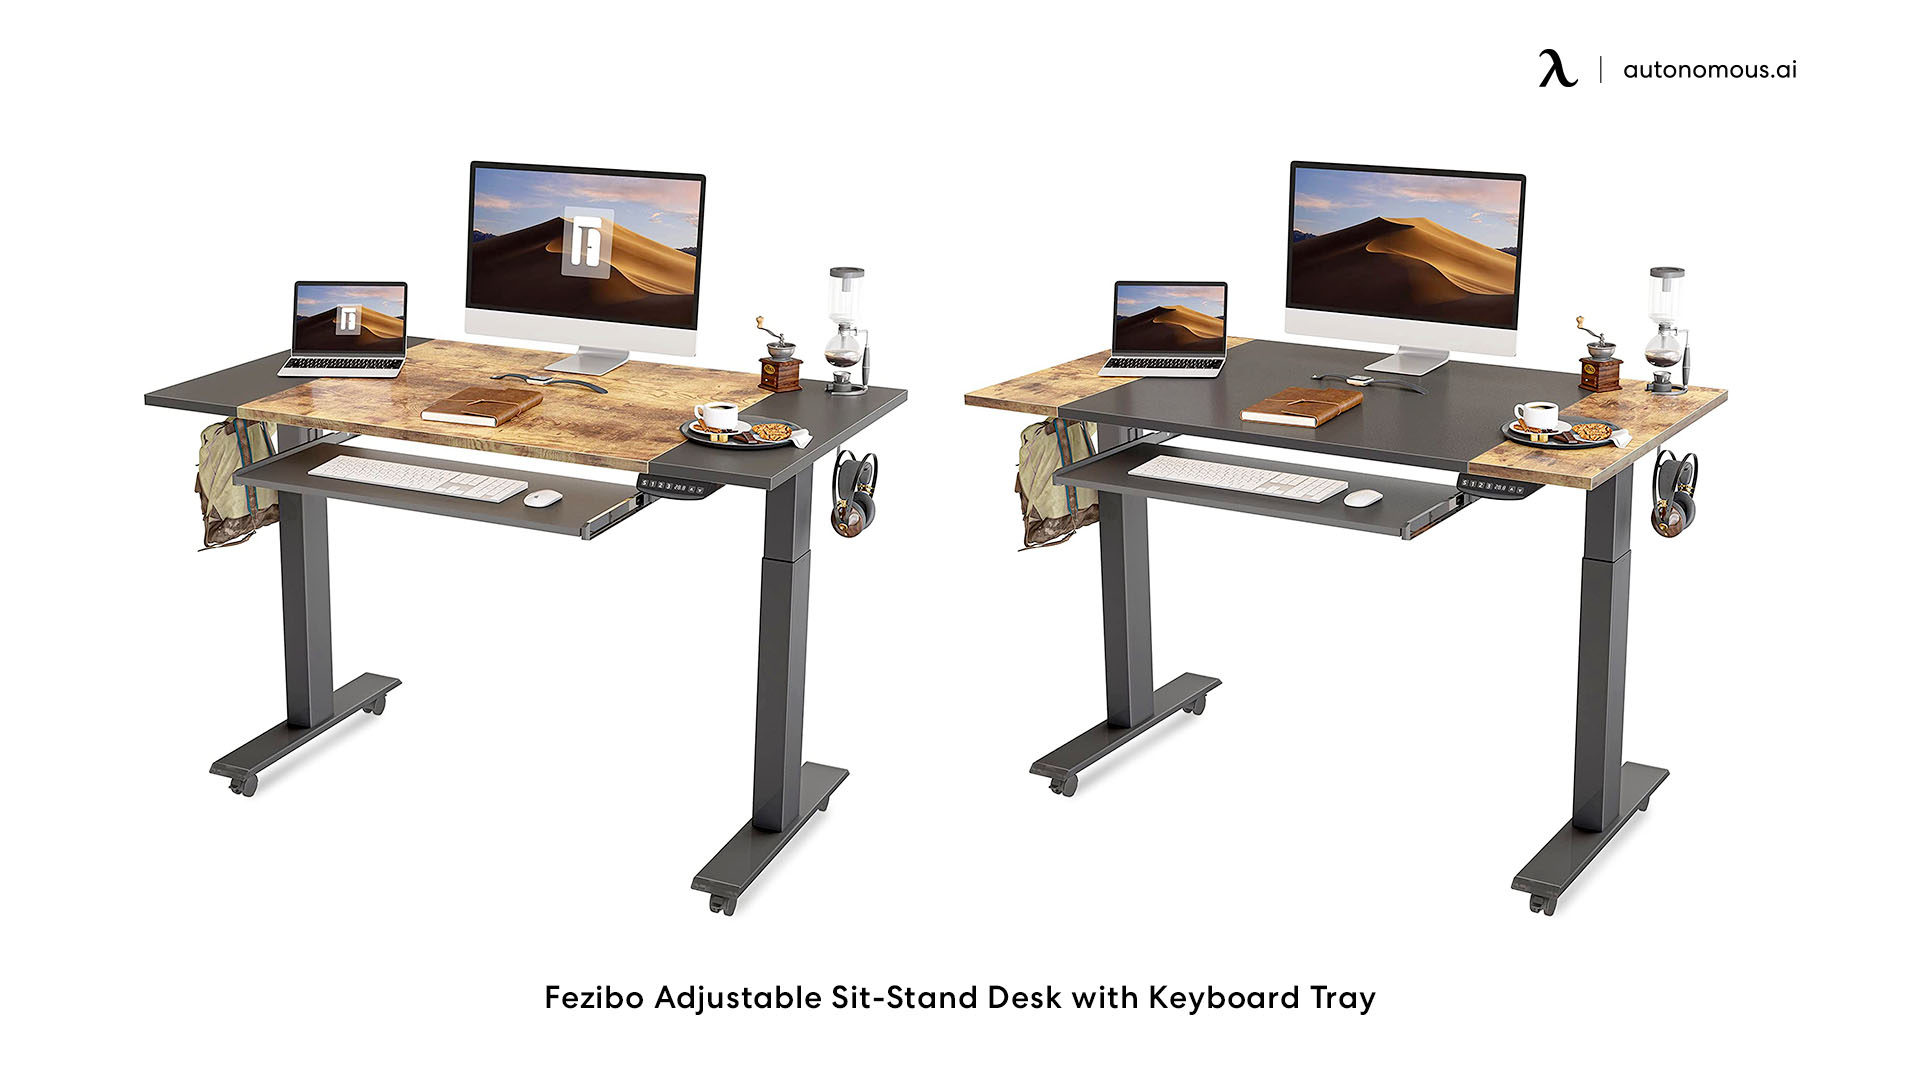 Fezibo Adjustable Sit-Stand Desk with Keyboard Tray